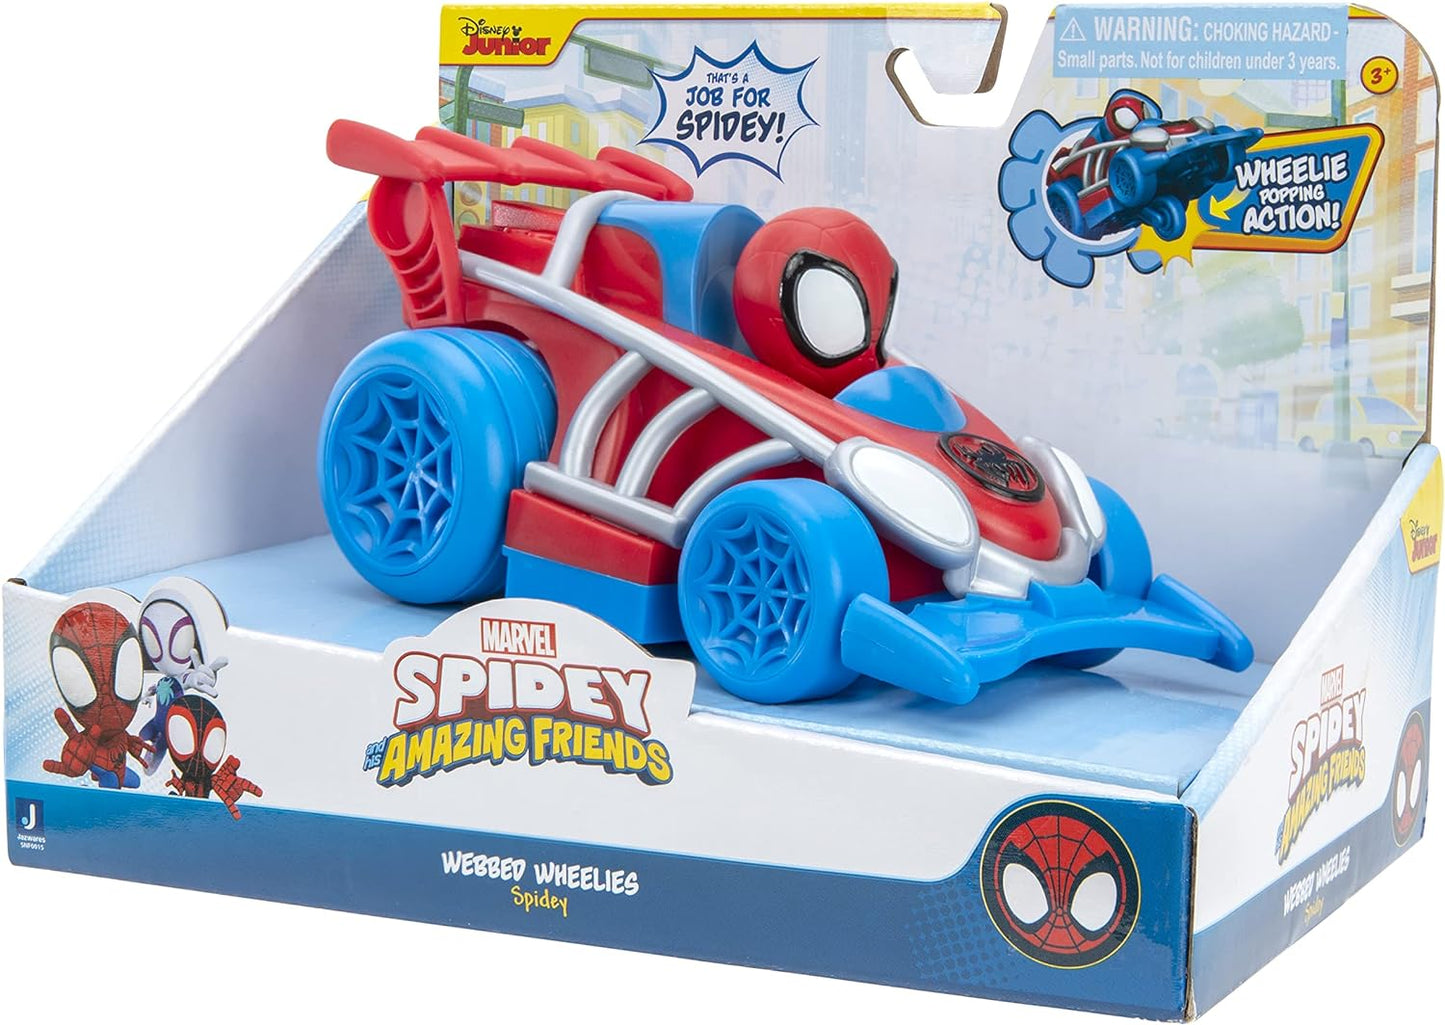 Marvel Spidey and His Amazing Friends Webbed Wheelie Vehicle - Features Built-in Spidey Super Hero